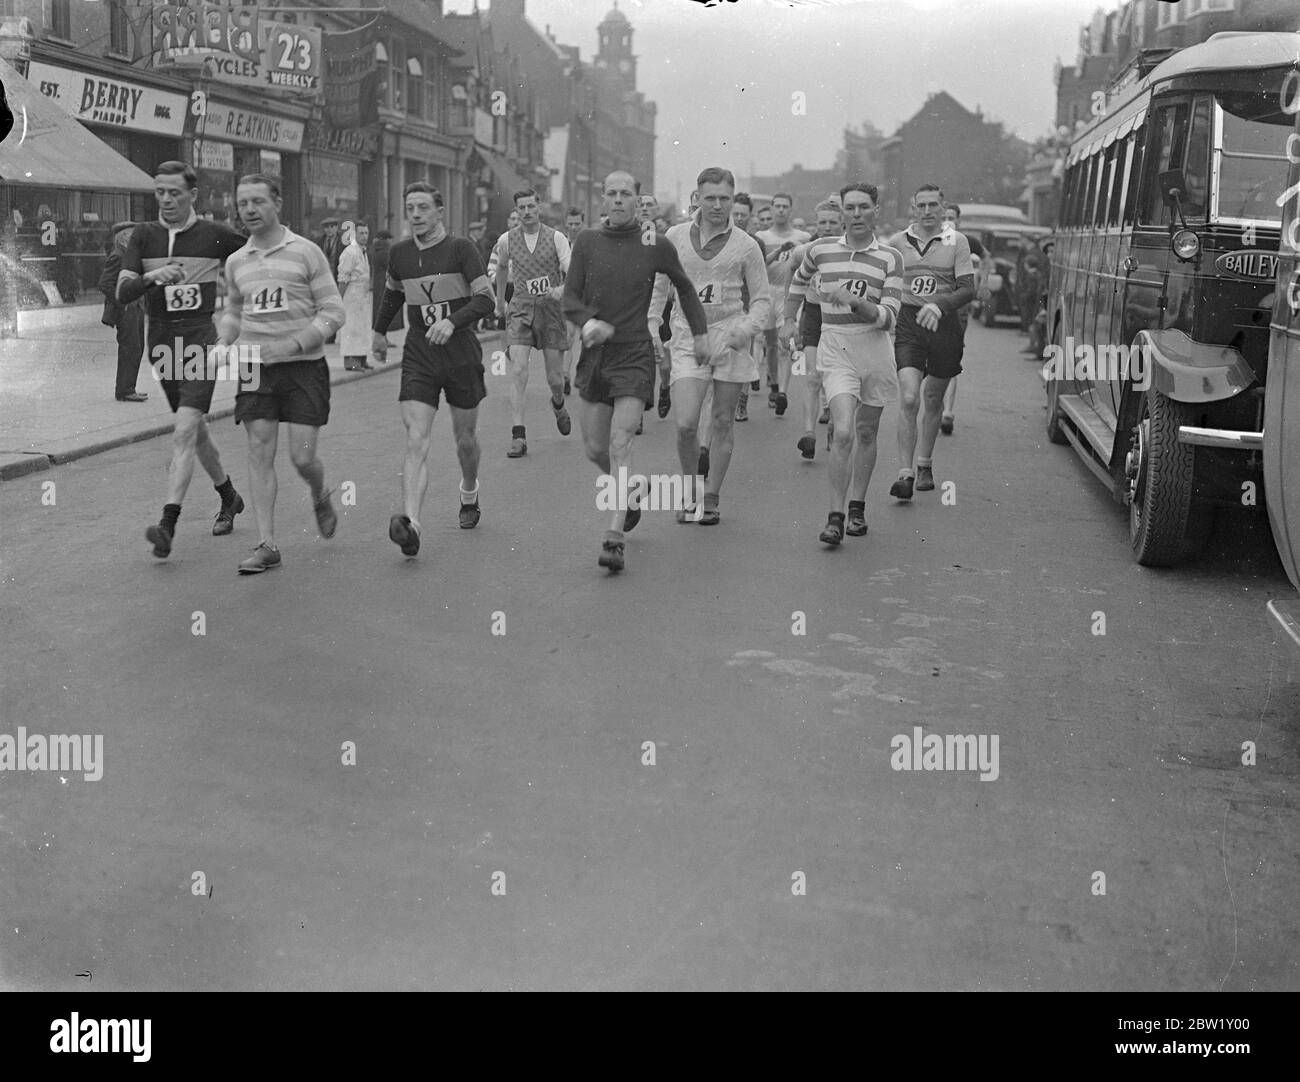 Police compete in Barking - Southend Walk. Police athletes started from Barking Police Station on their annual Barking - Southend. Photo shows: competitors on the road. 29 April 1937 Stock Photo